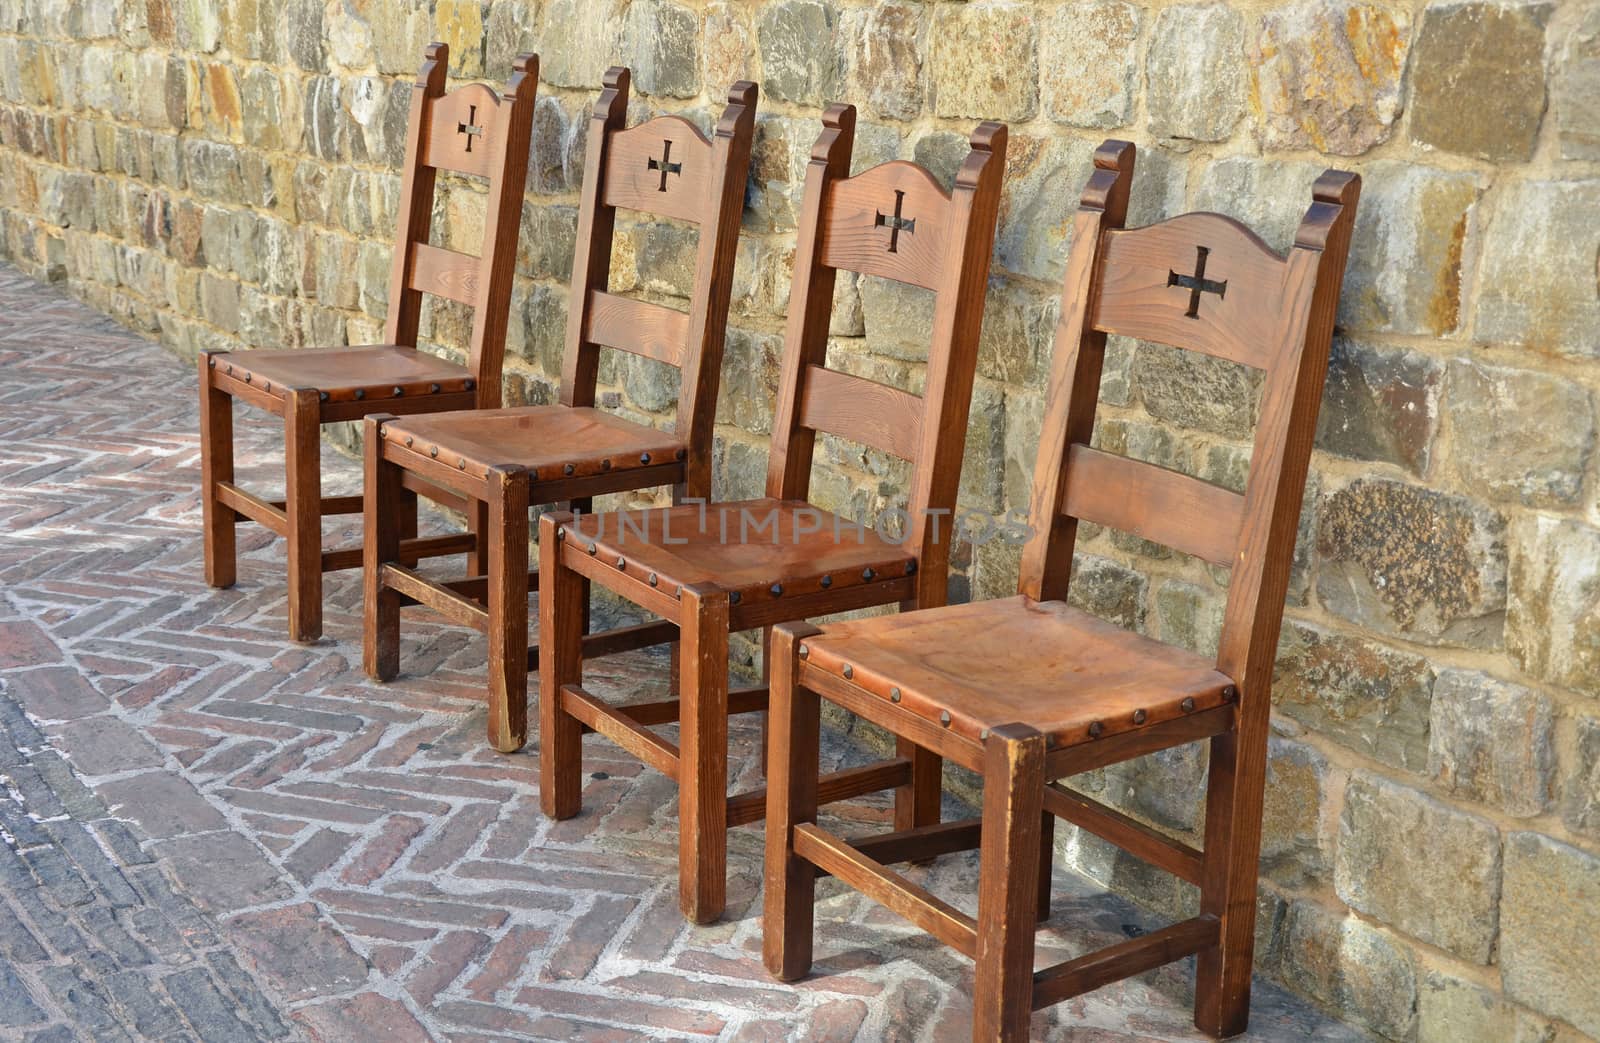 Medieval chairs on brick patio by ingperl